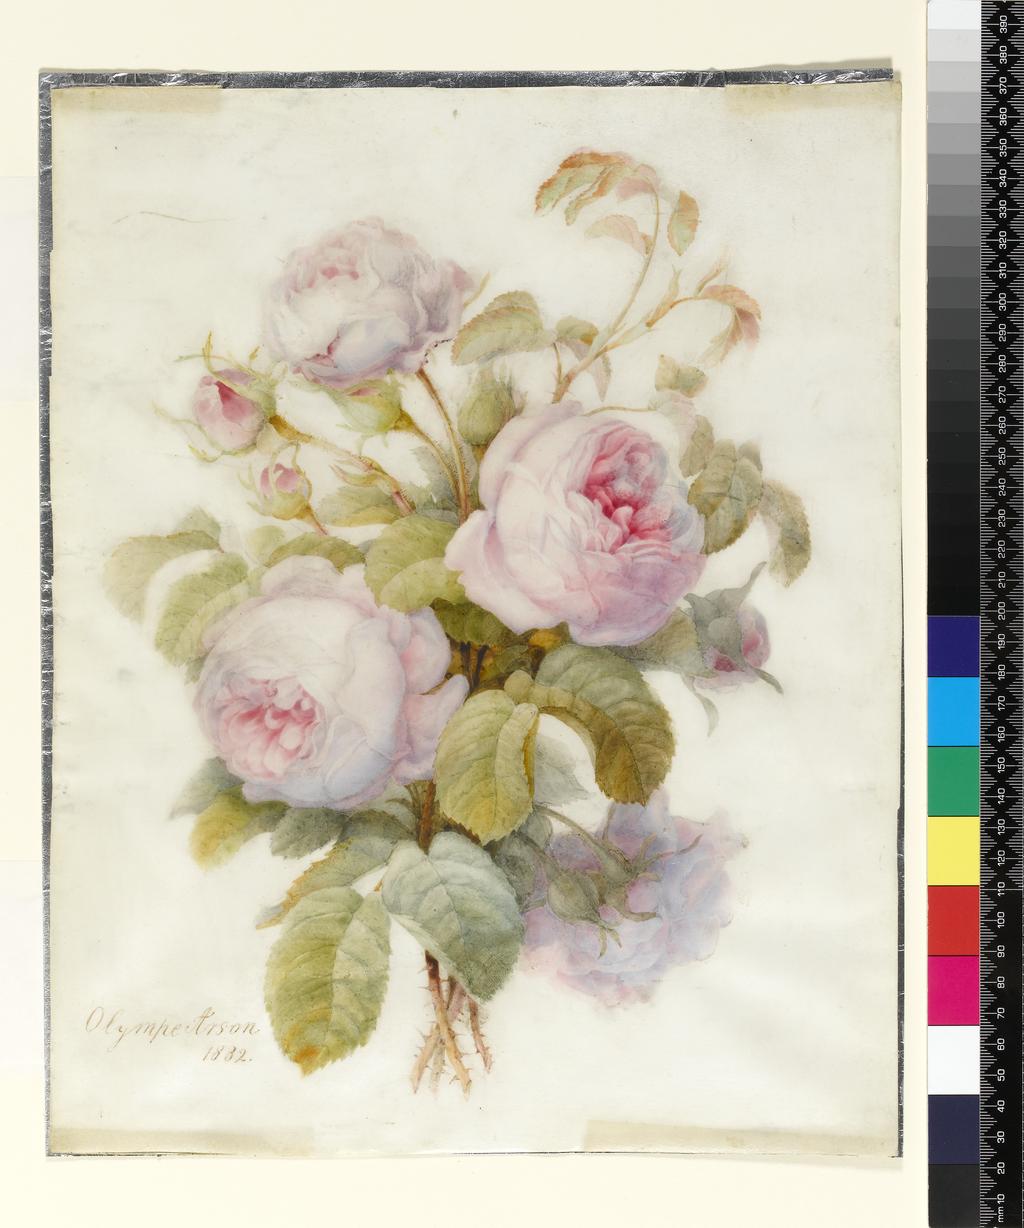 An image of Arson, Olympe. Bunch of Centifolia Roses. Watercolour over graphite outline on vellum. 1832.